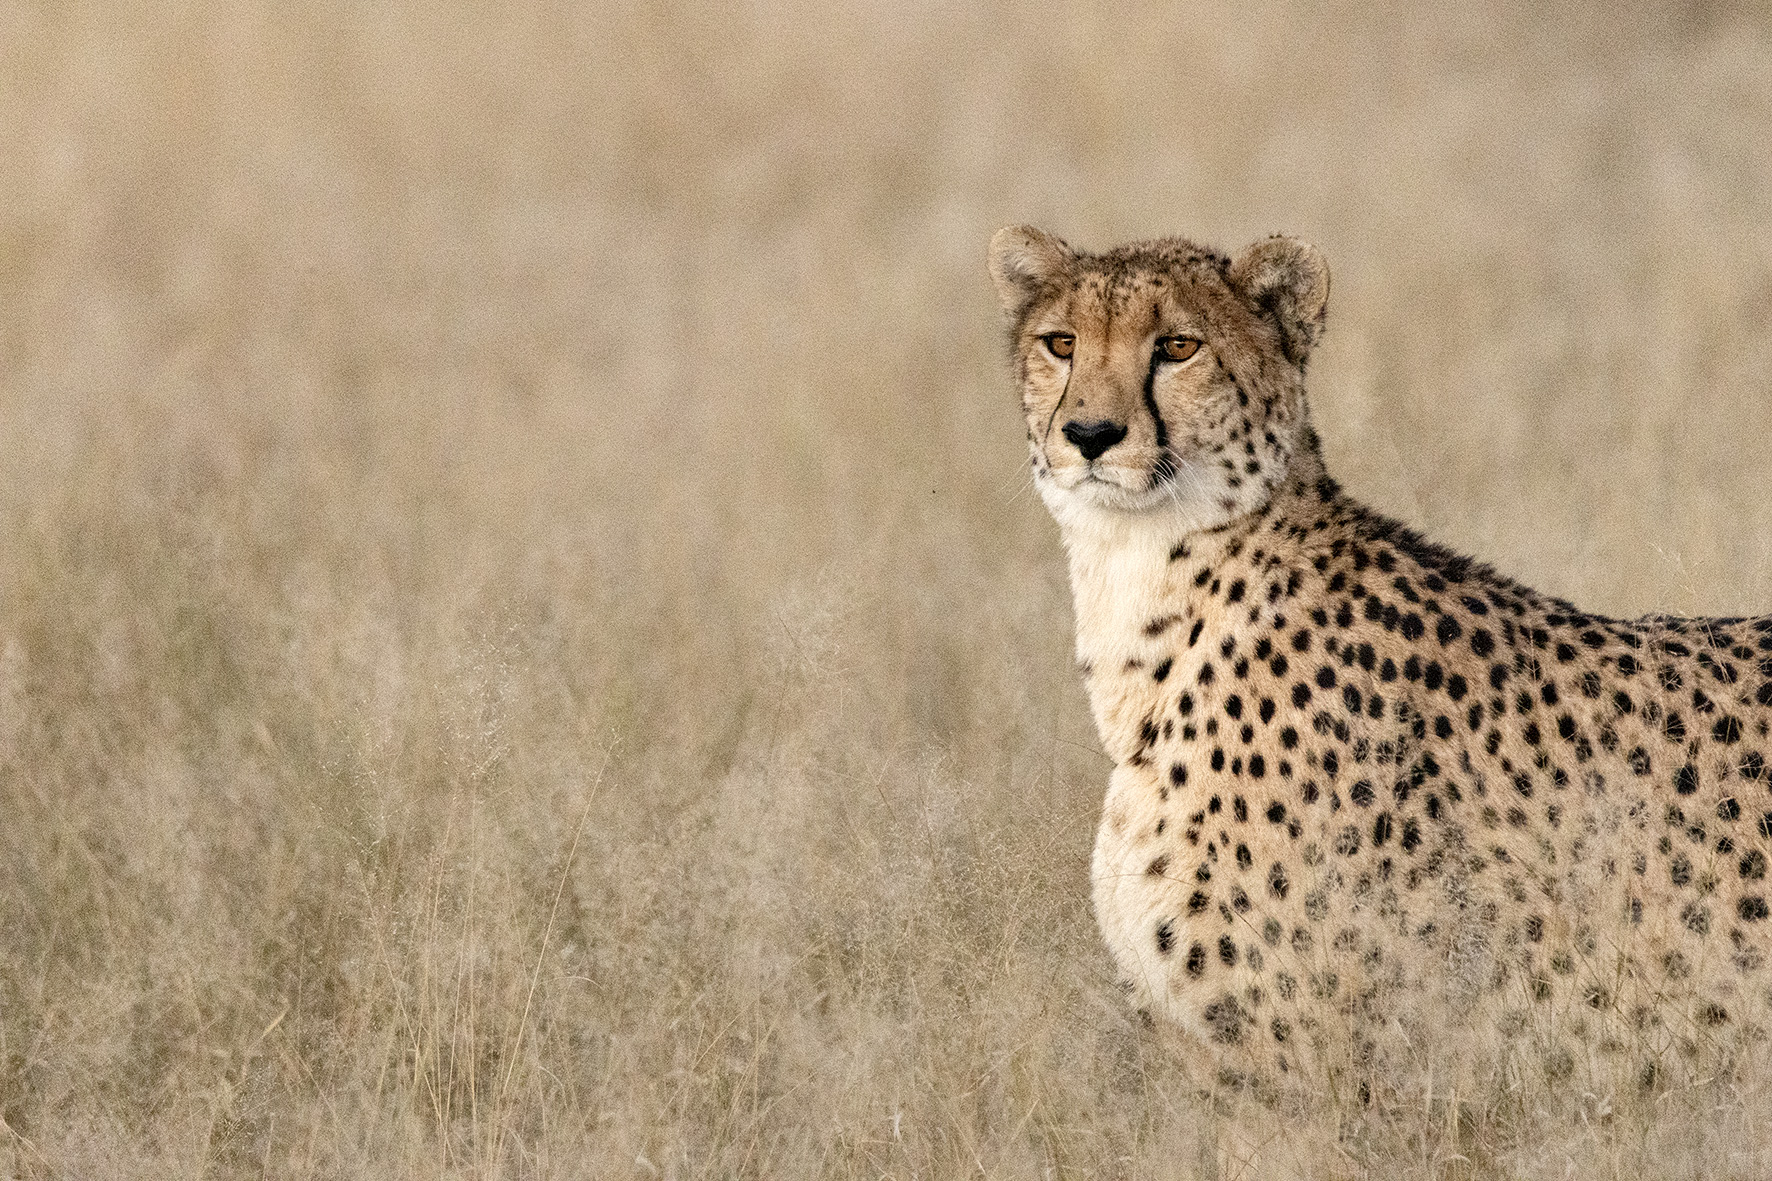 A cheetah spotted during an afternoon game drive in Africa